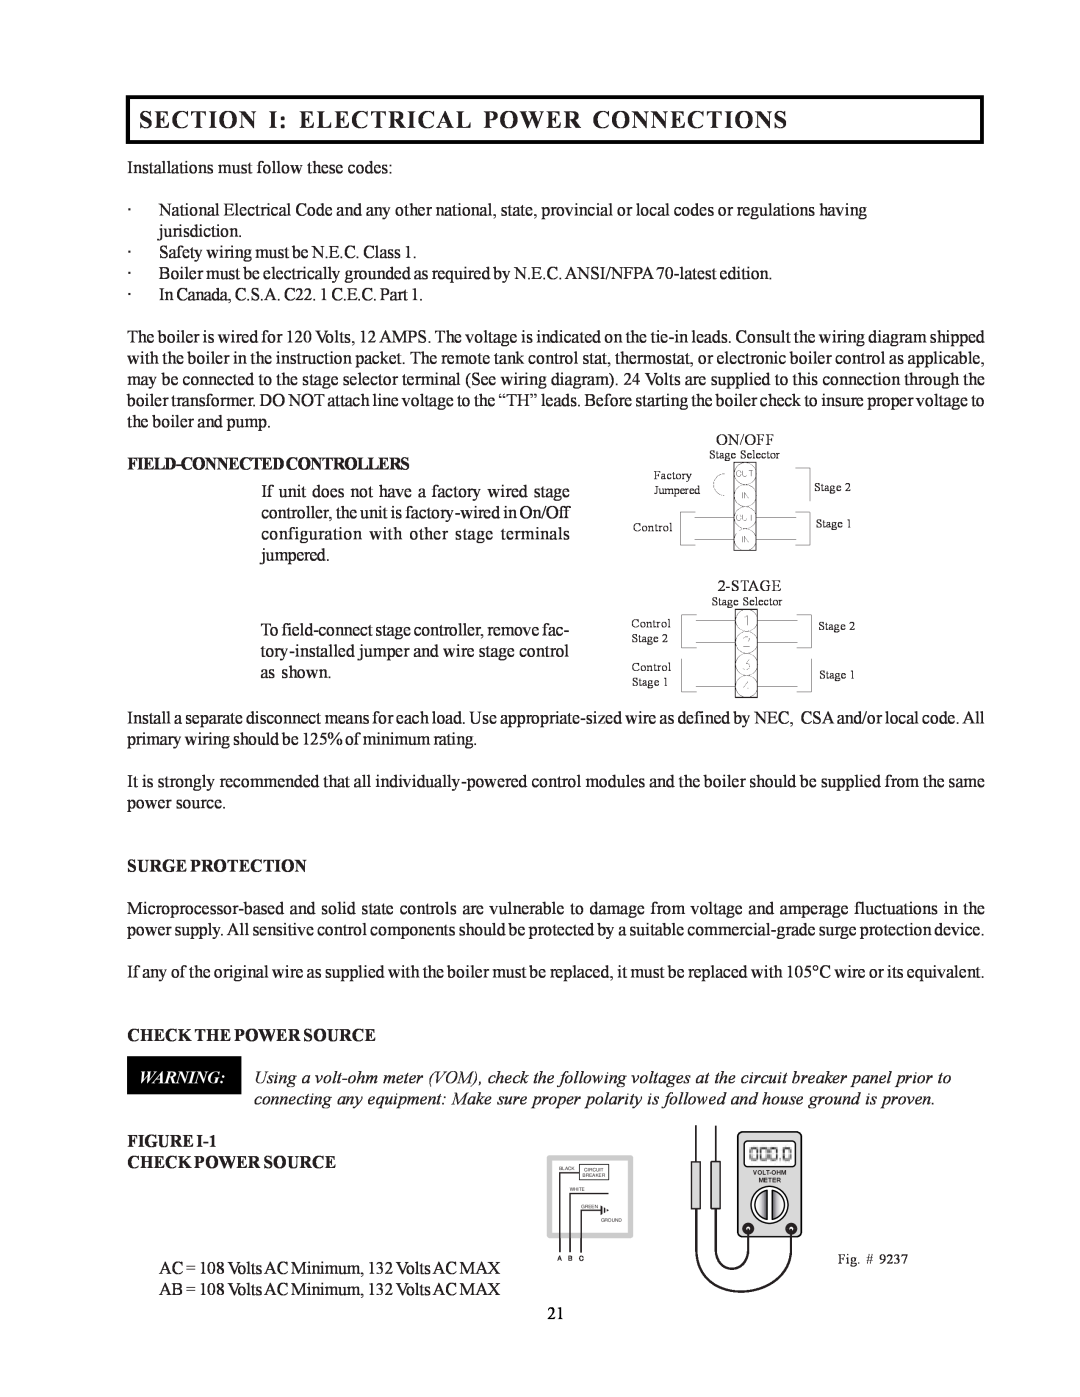 Raypak 302-902 manual Section I Electrical Power Connections, Field-Connectedcontrollers, Surge Protection 